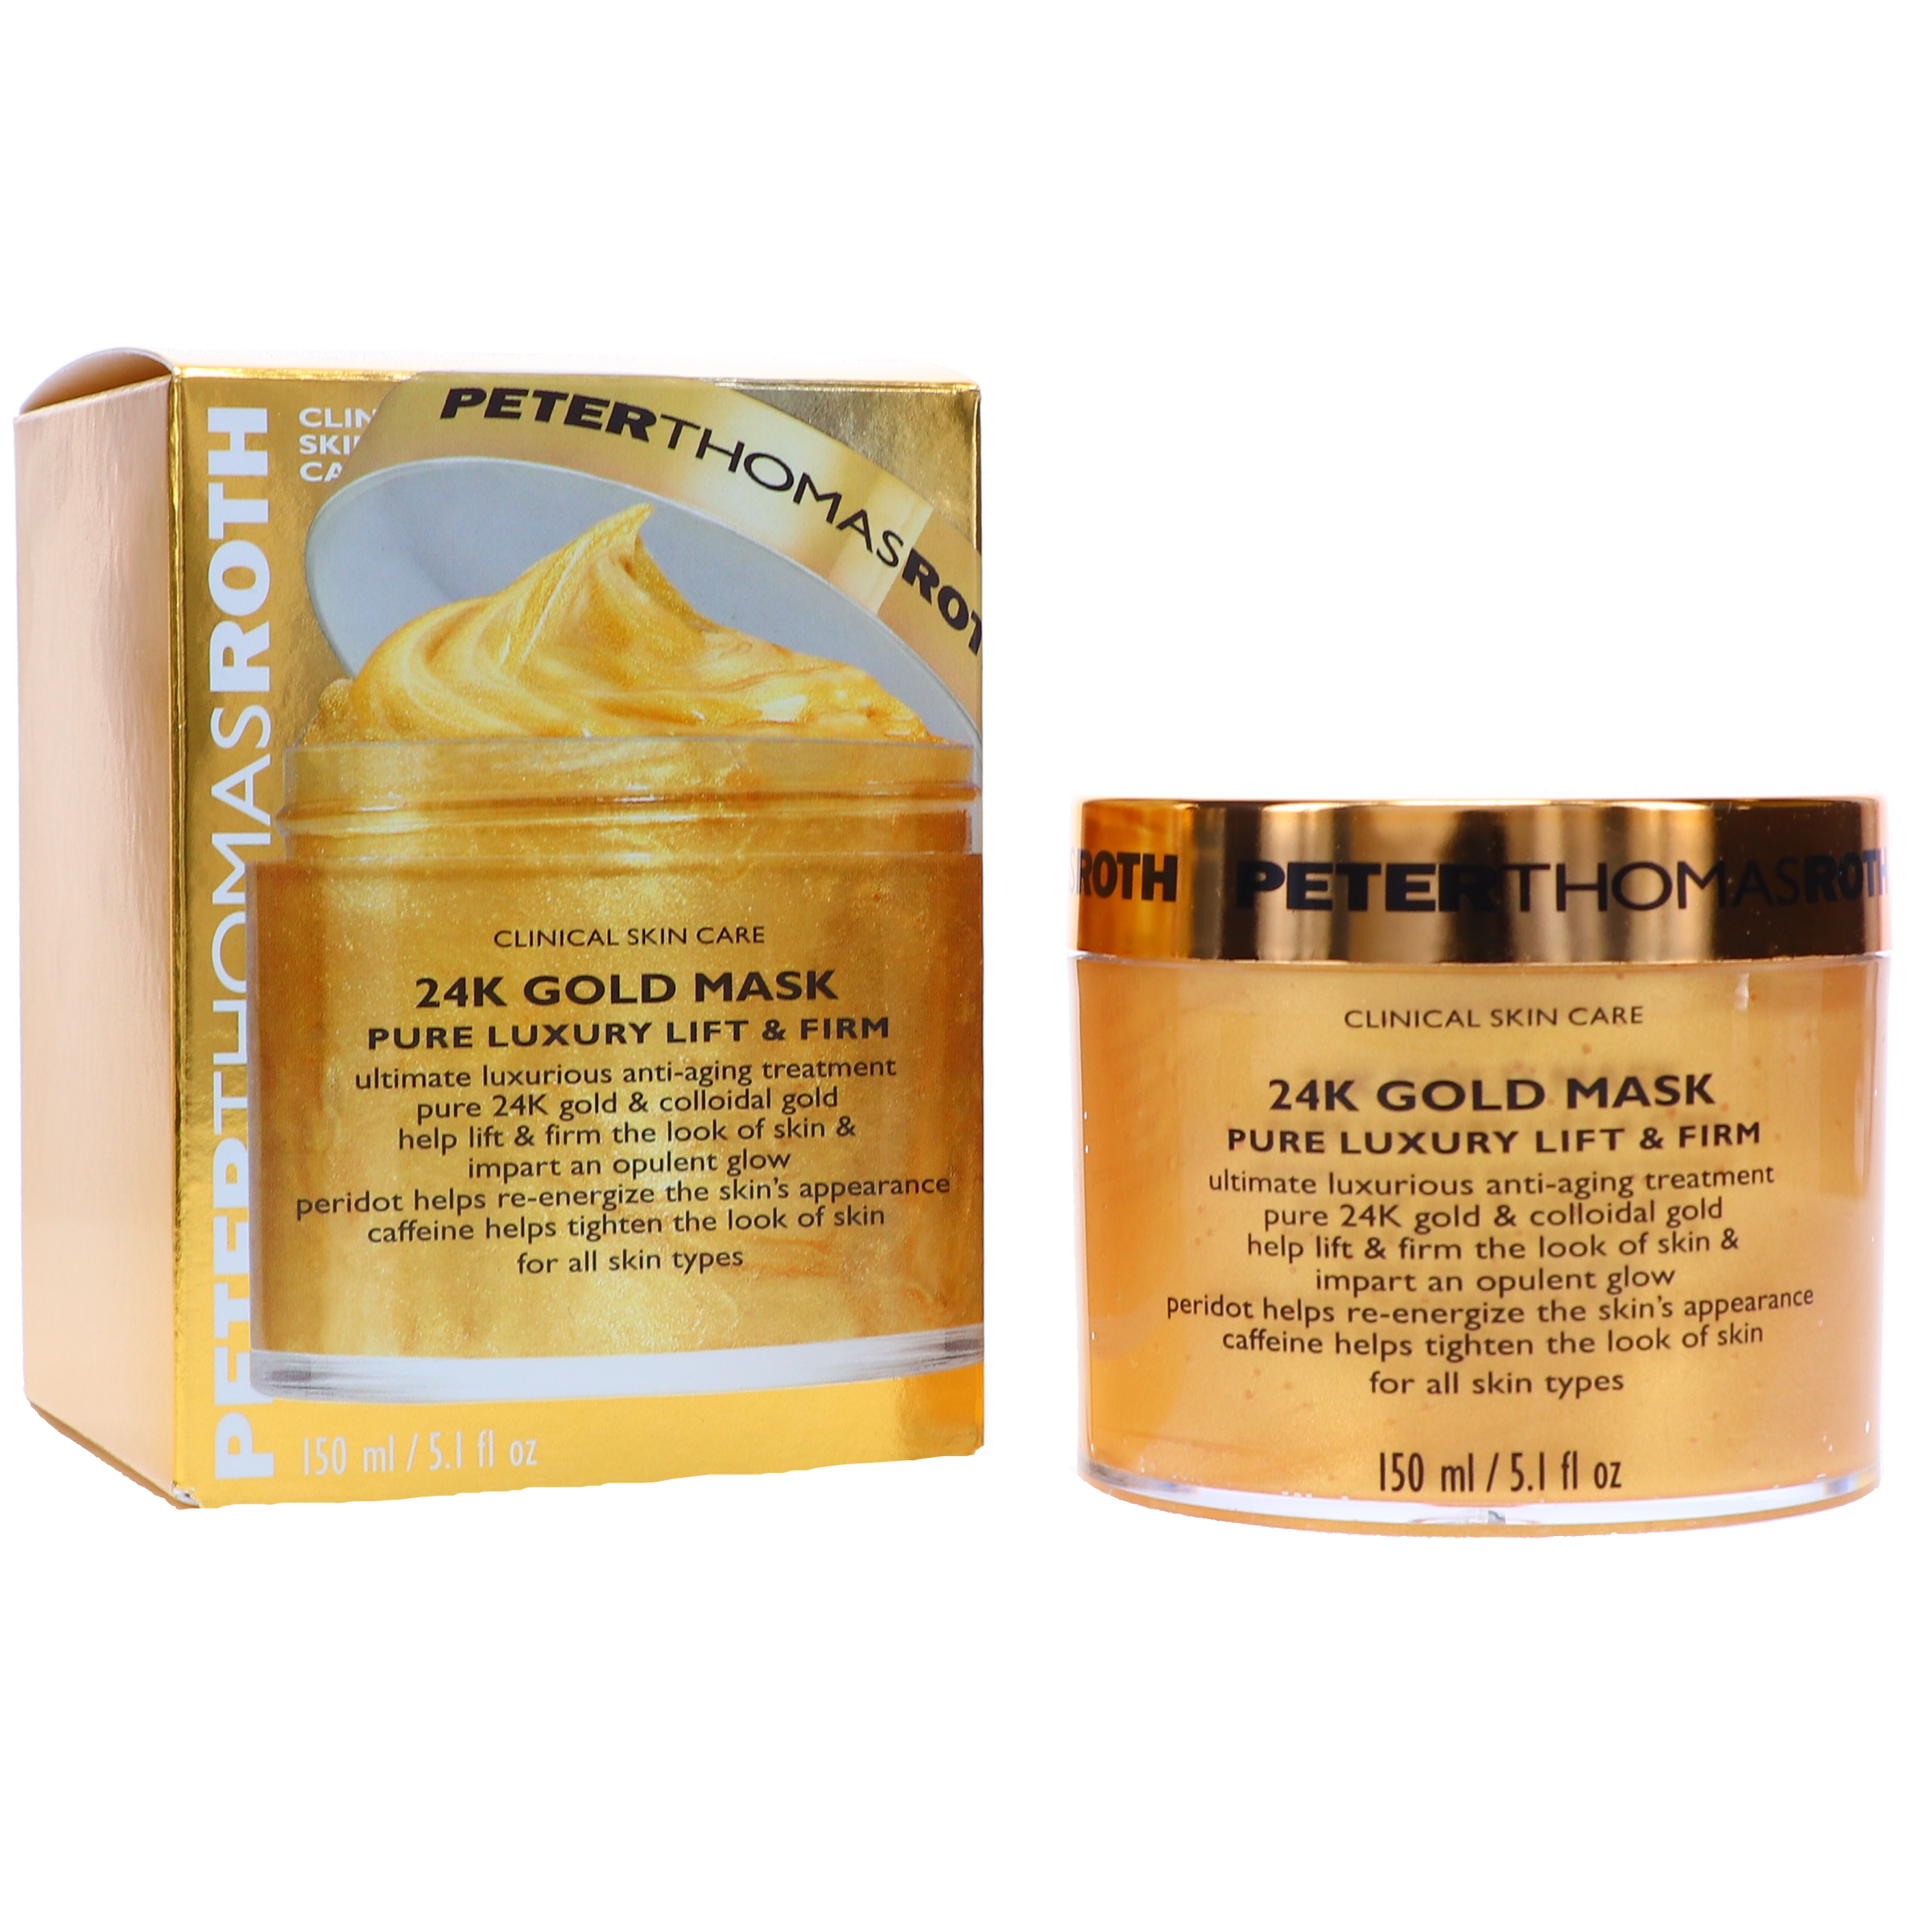 Peter Thomas Roth 24K Gold Mask Pure Luxury Lift & Firm Mask 5.1 oz - image 7 of 8